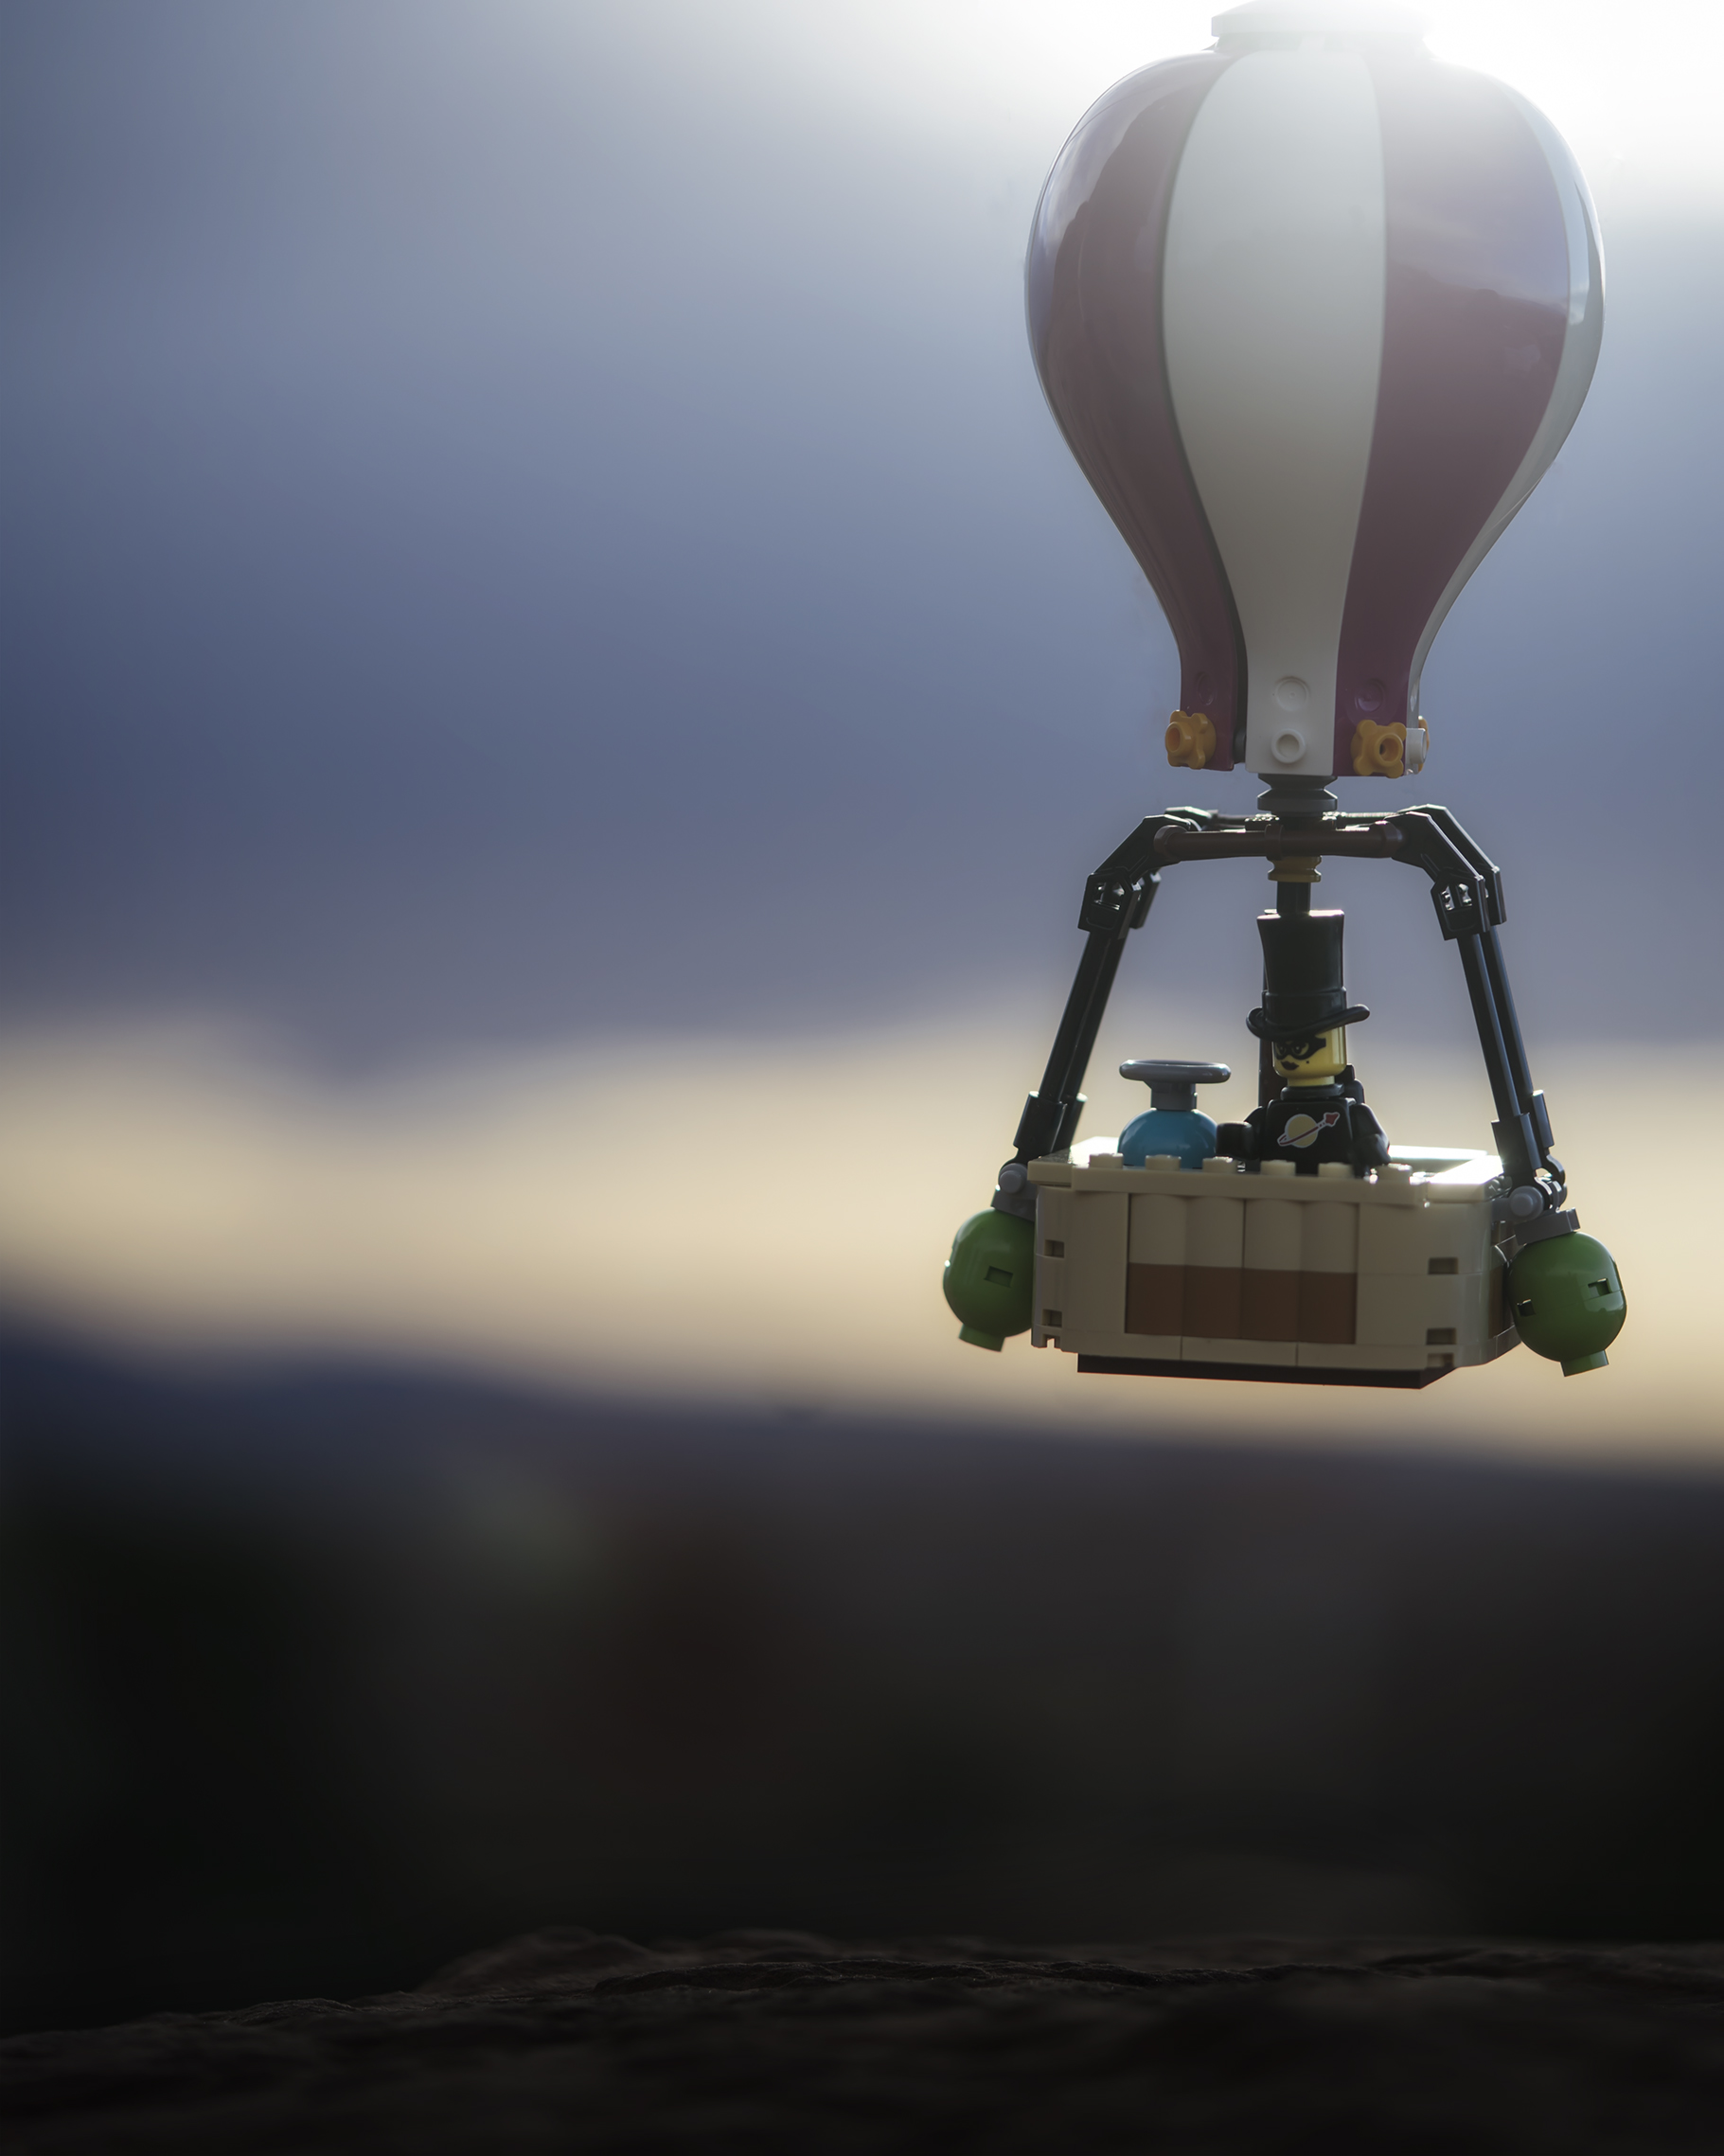 LEGO hot air ballon floats in the air with dark clouds looming in the distance. 